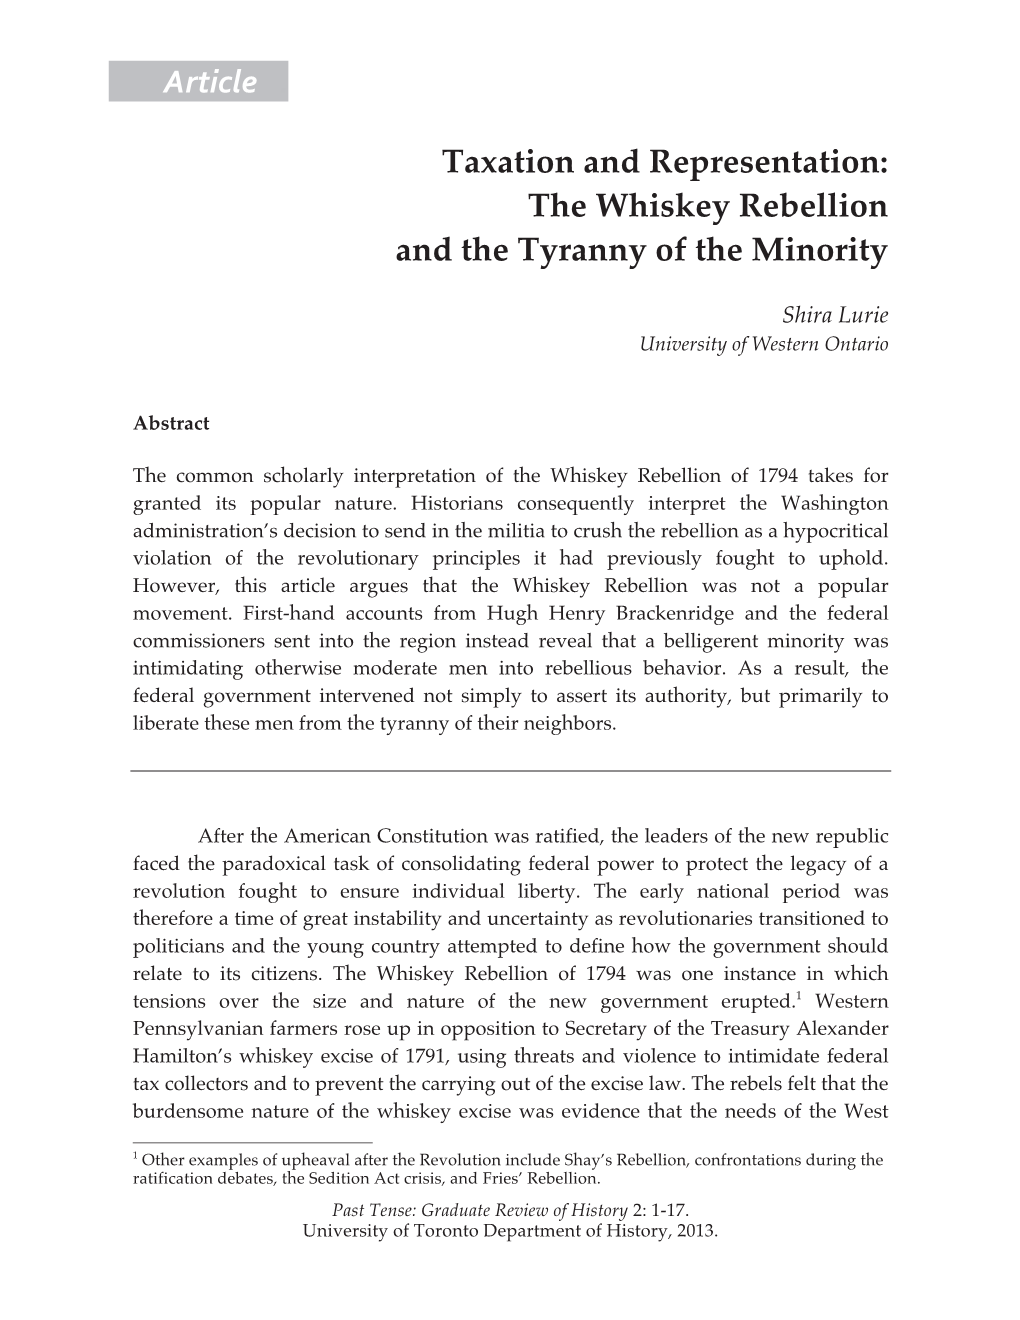 Rticle . Taxation and Representation: the Whiskey Rebellion and The